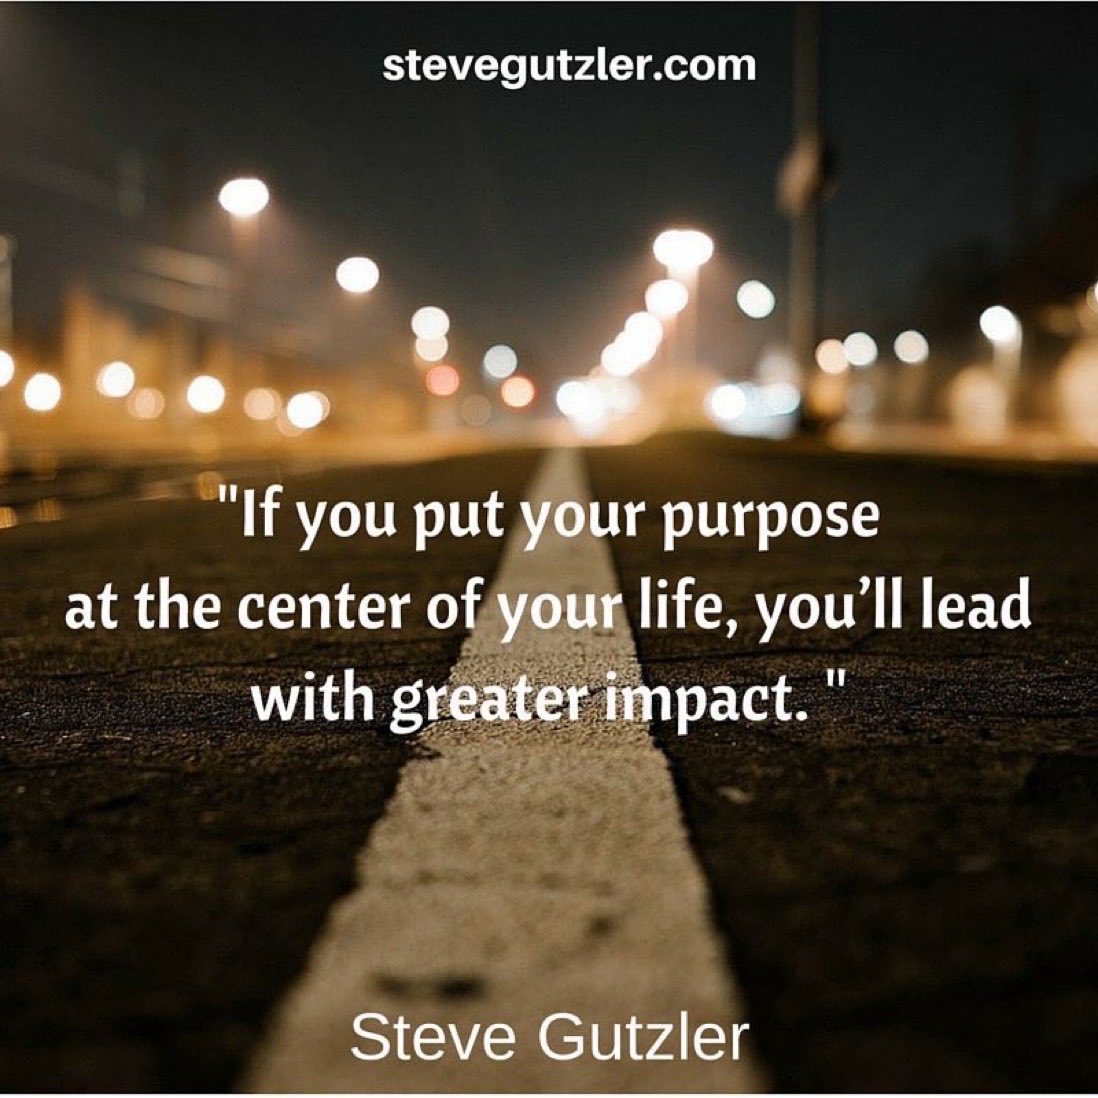 If you put your purpose at the center of your life, you’ll lead with greater impact. #Purpose #Leadership #Impact